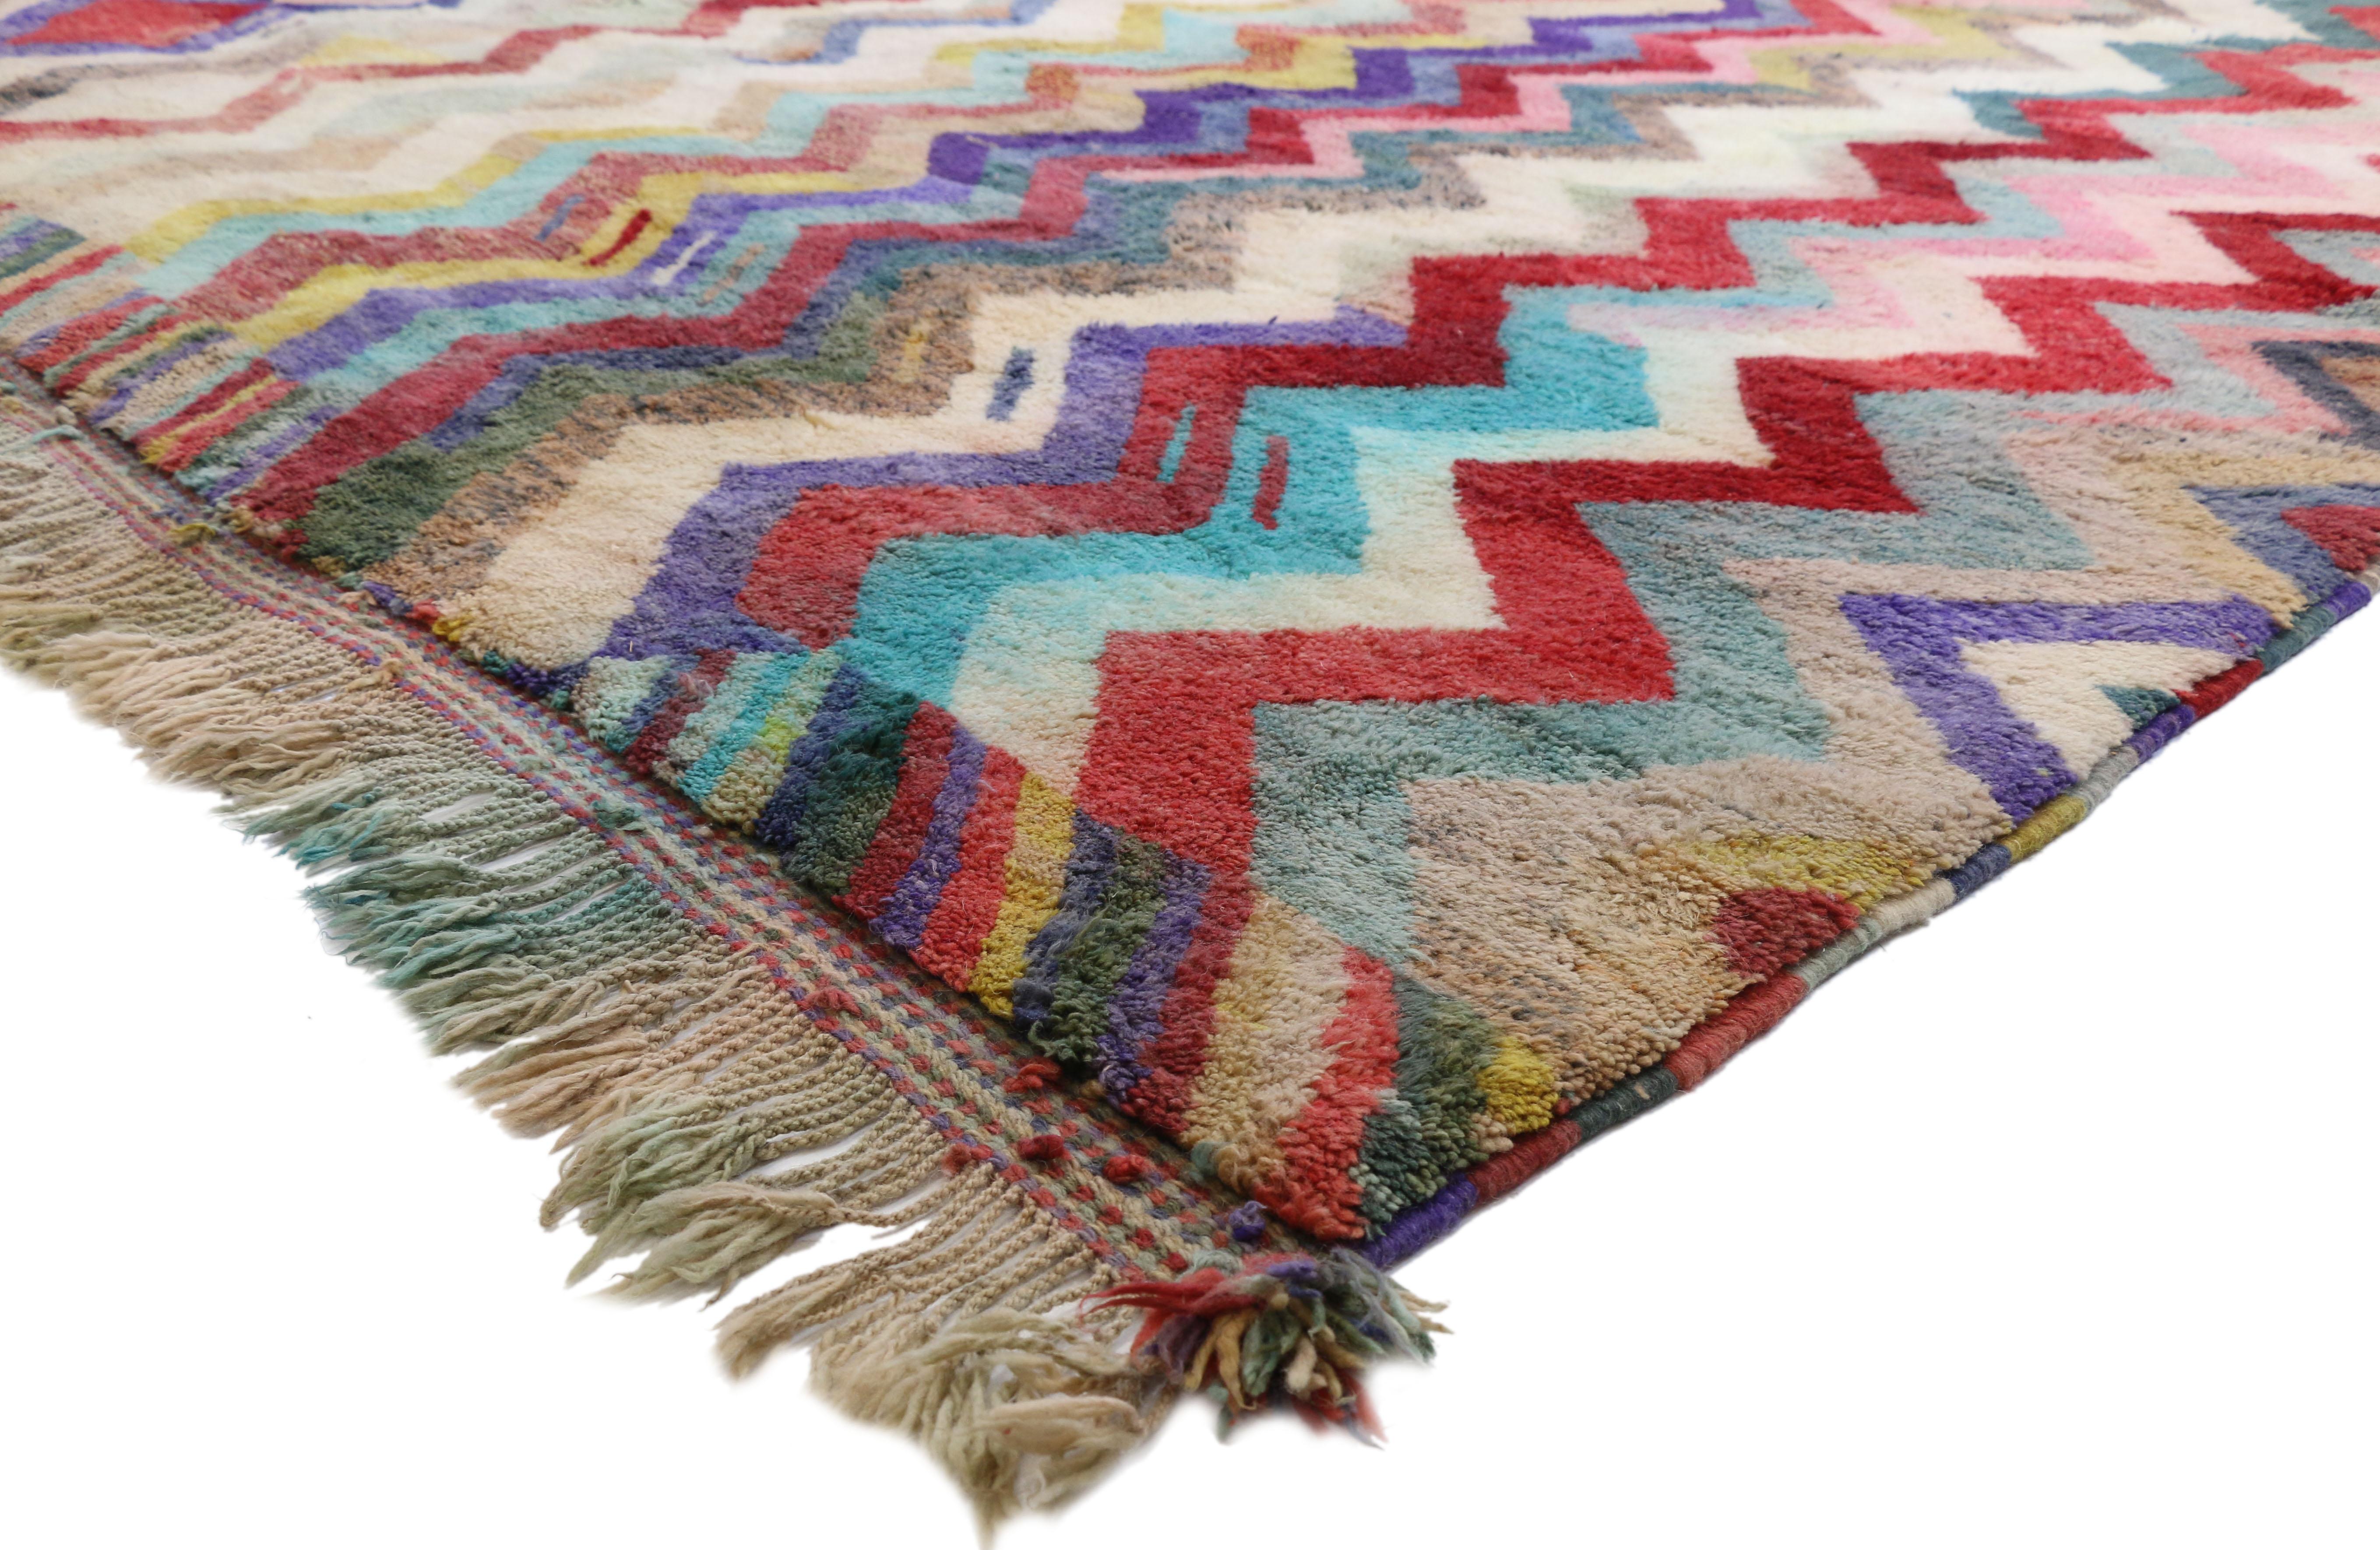 20802 New Contemporary Moroccan Rug, Berber Postmodern Rug Inspired by Missoni Home. This hand knotted wool Contemporary Berber Moroccan rug features the famous poly-chromatic chevron pattern so popularized by Italian luxury design brand Missoni.